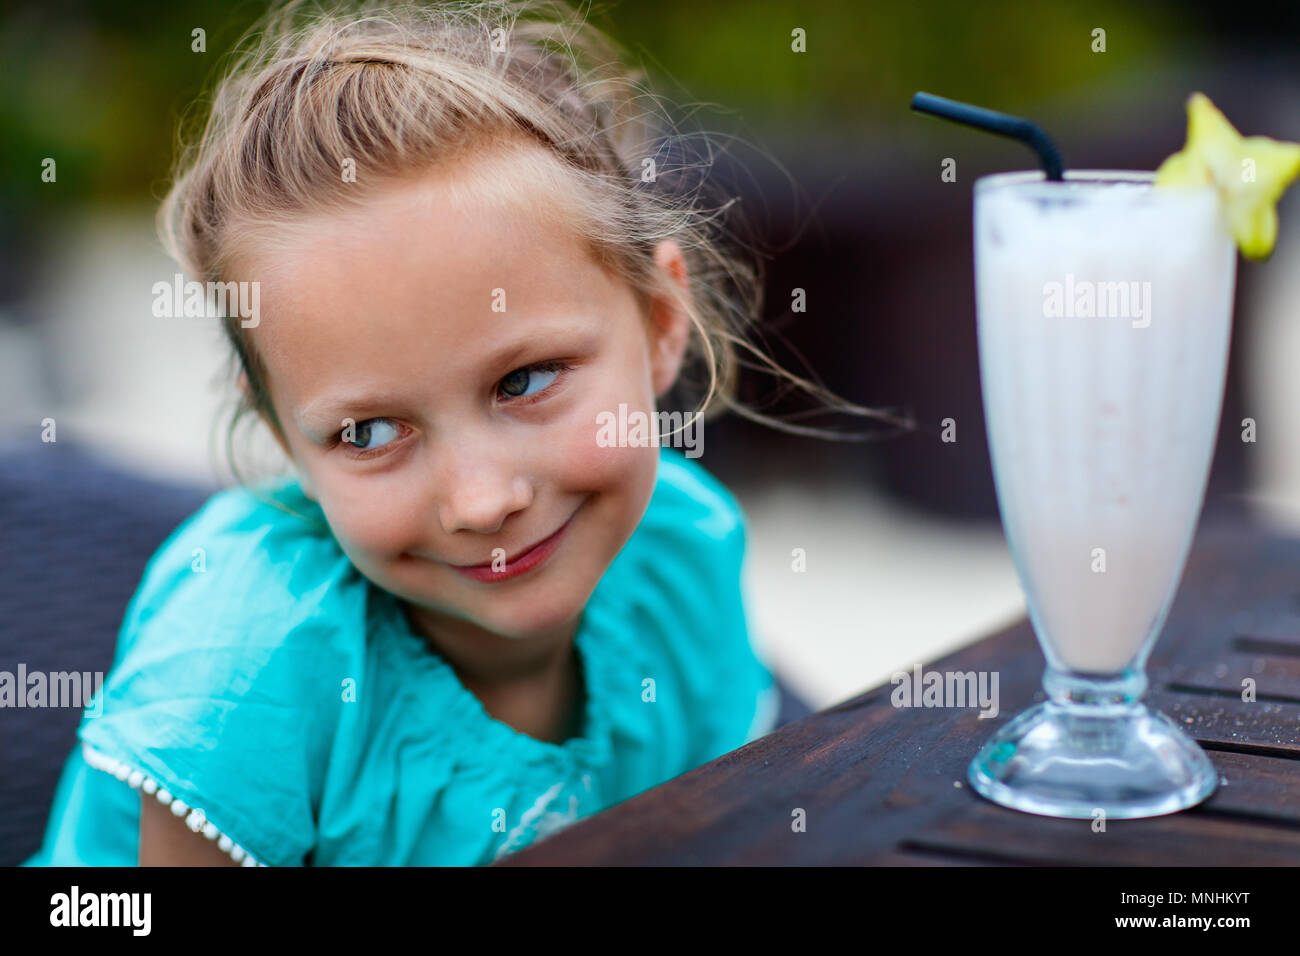 Adorable little girl drinking fresh smoothie at outdoor cafe on summer day Stock Photo